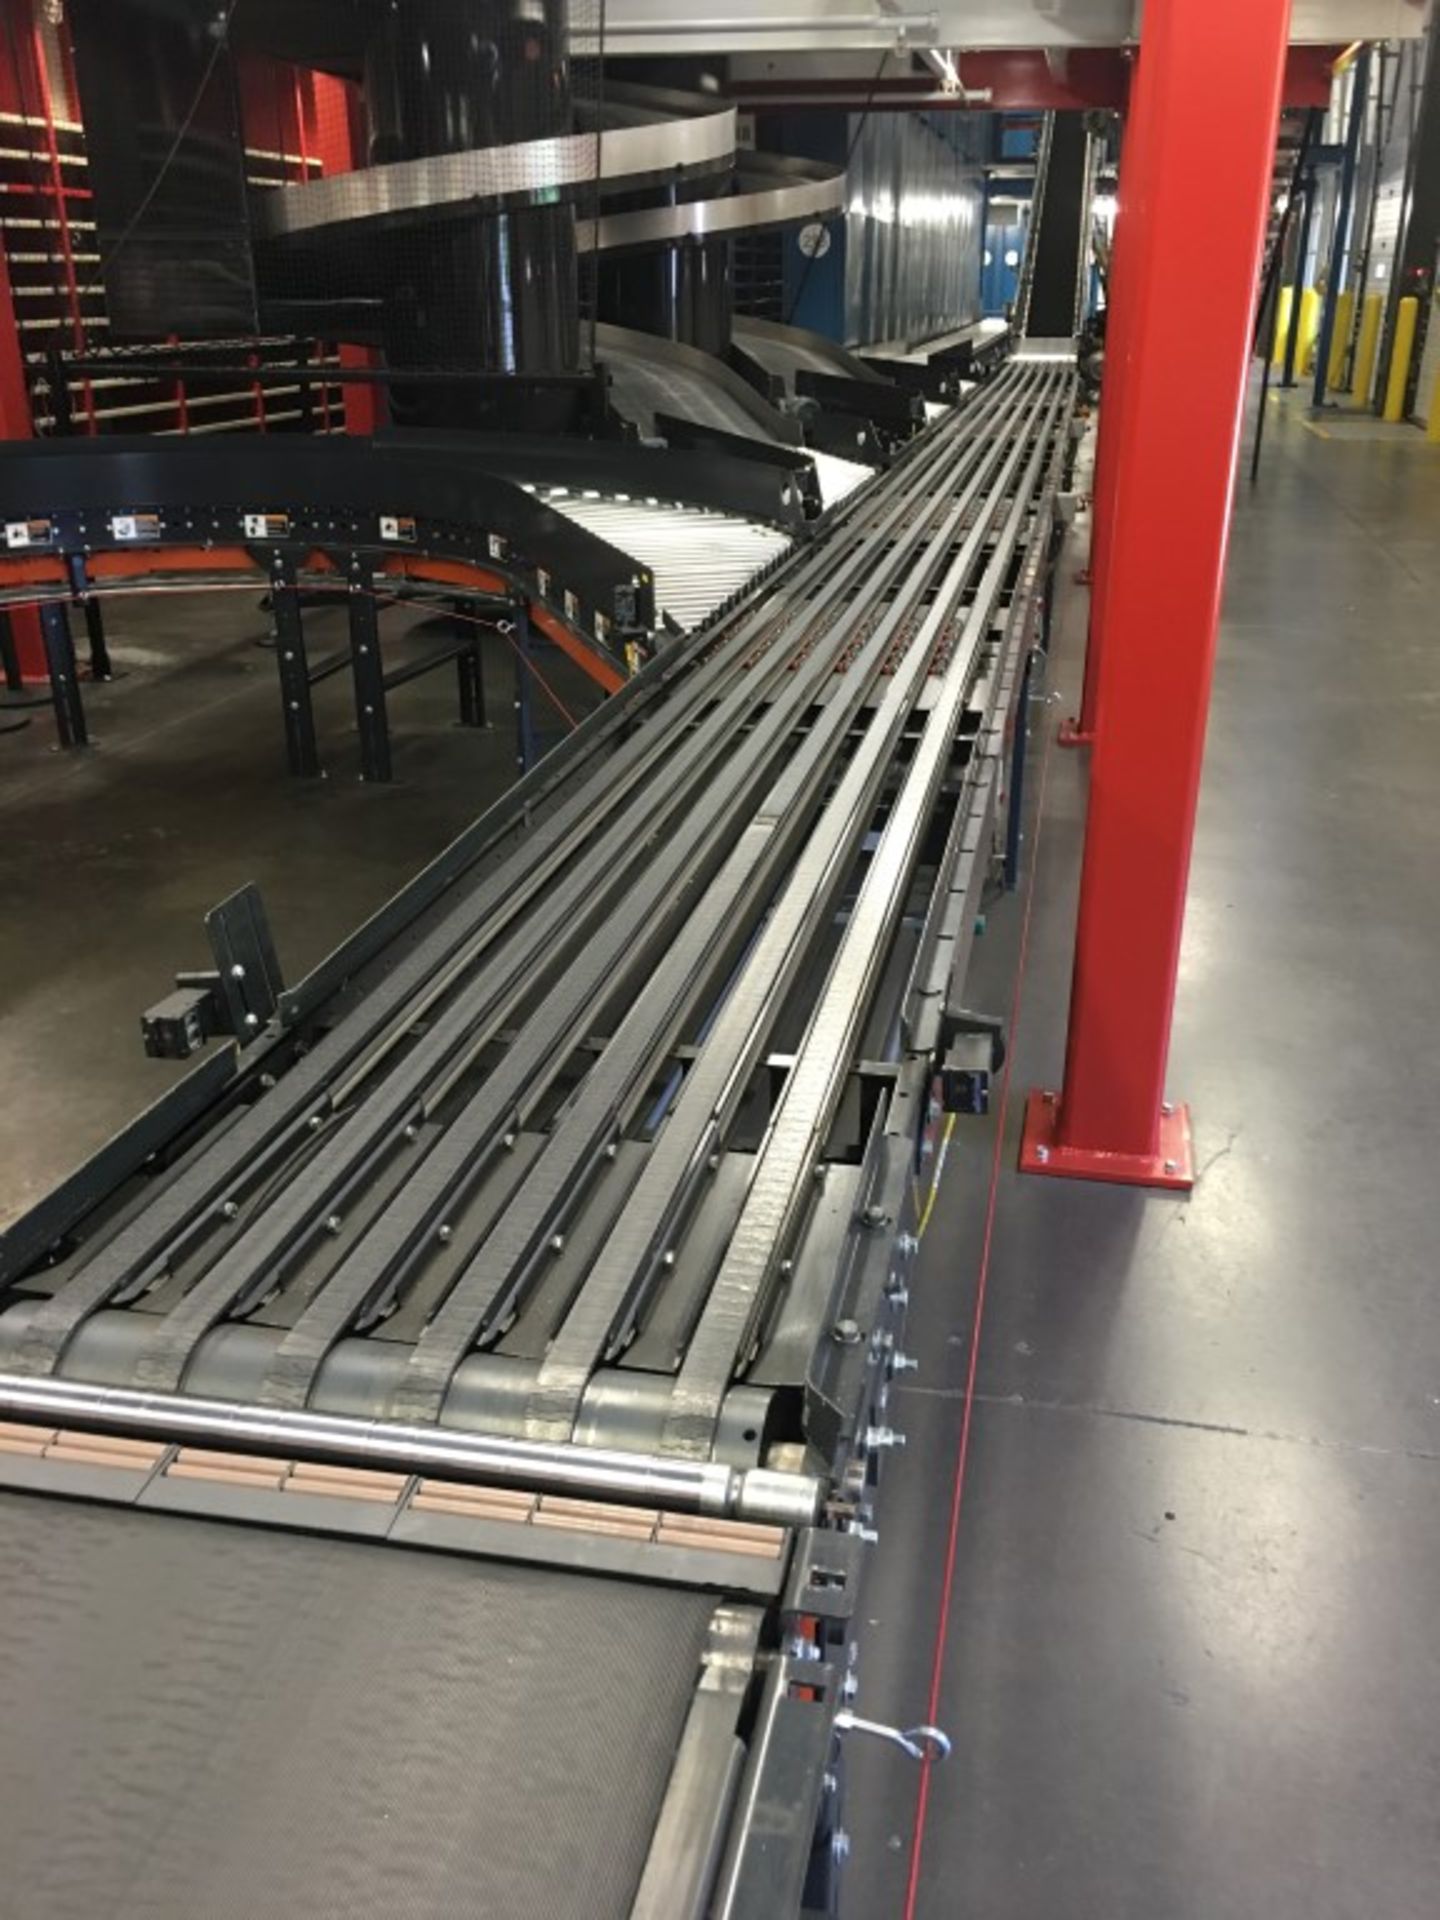 45 FT OF TGW NBS-30 NARROW BELT SORTER, WITH 4 DIVERT POINTS. (CHECK VIDEO)